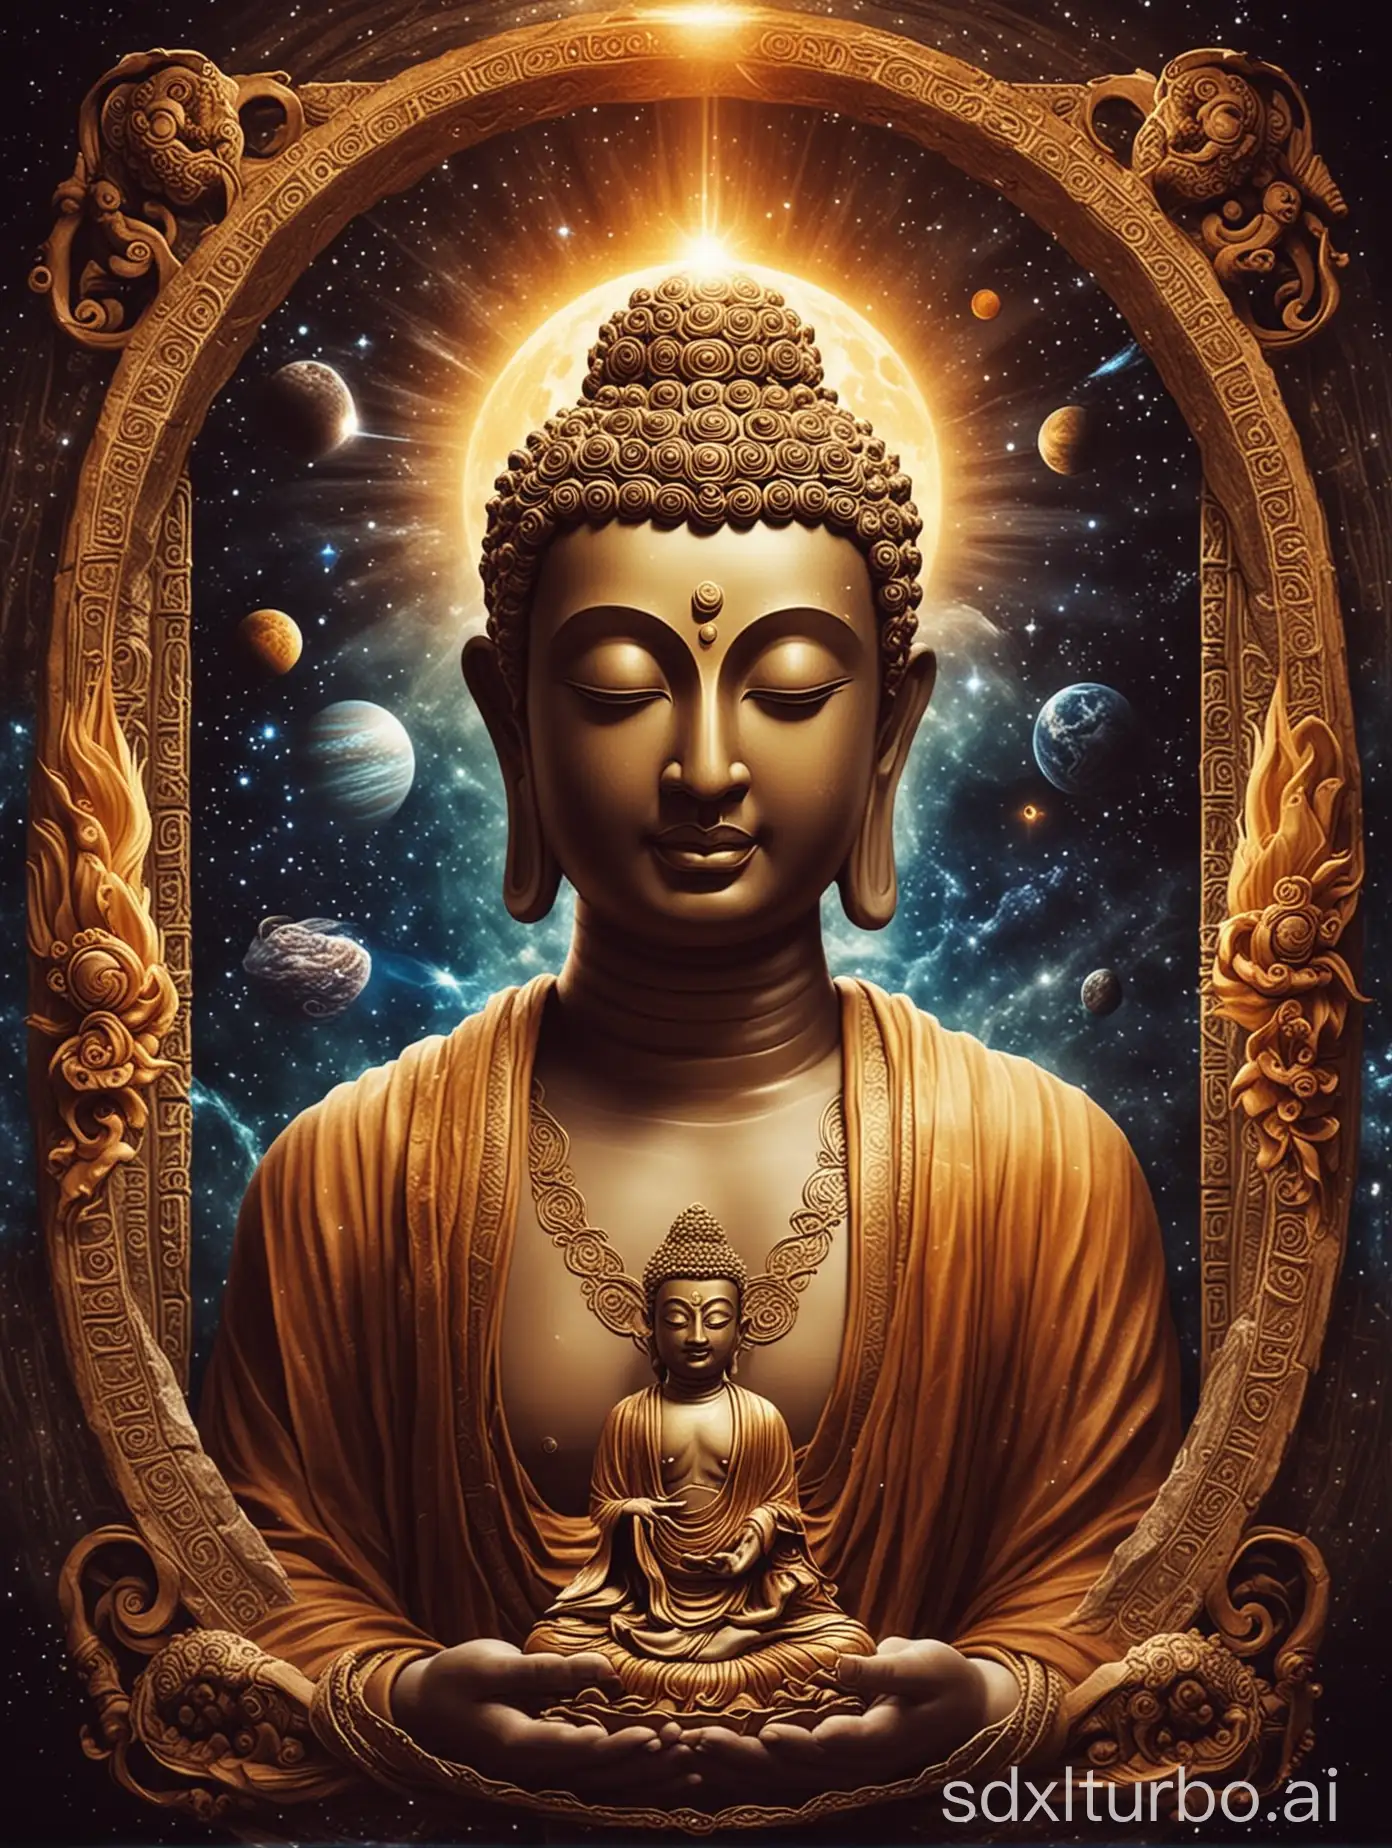 Rebirth-and-Purification-in-the-Solar-System-Computerized-Buddha-God